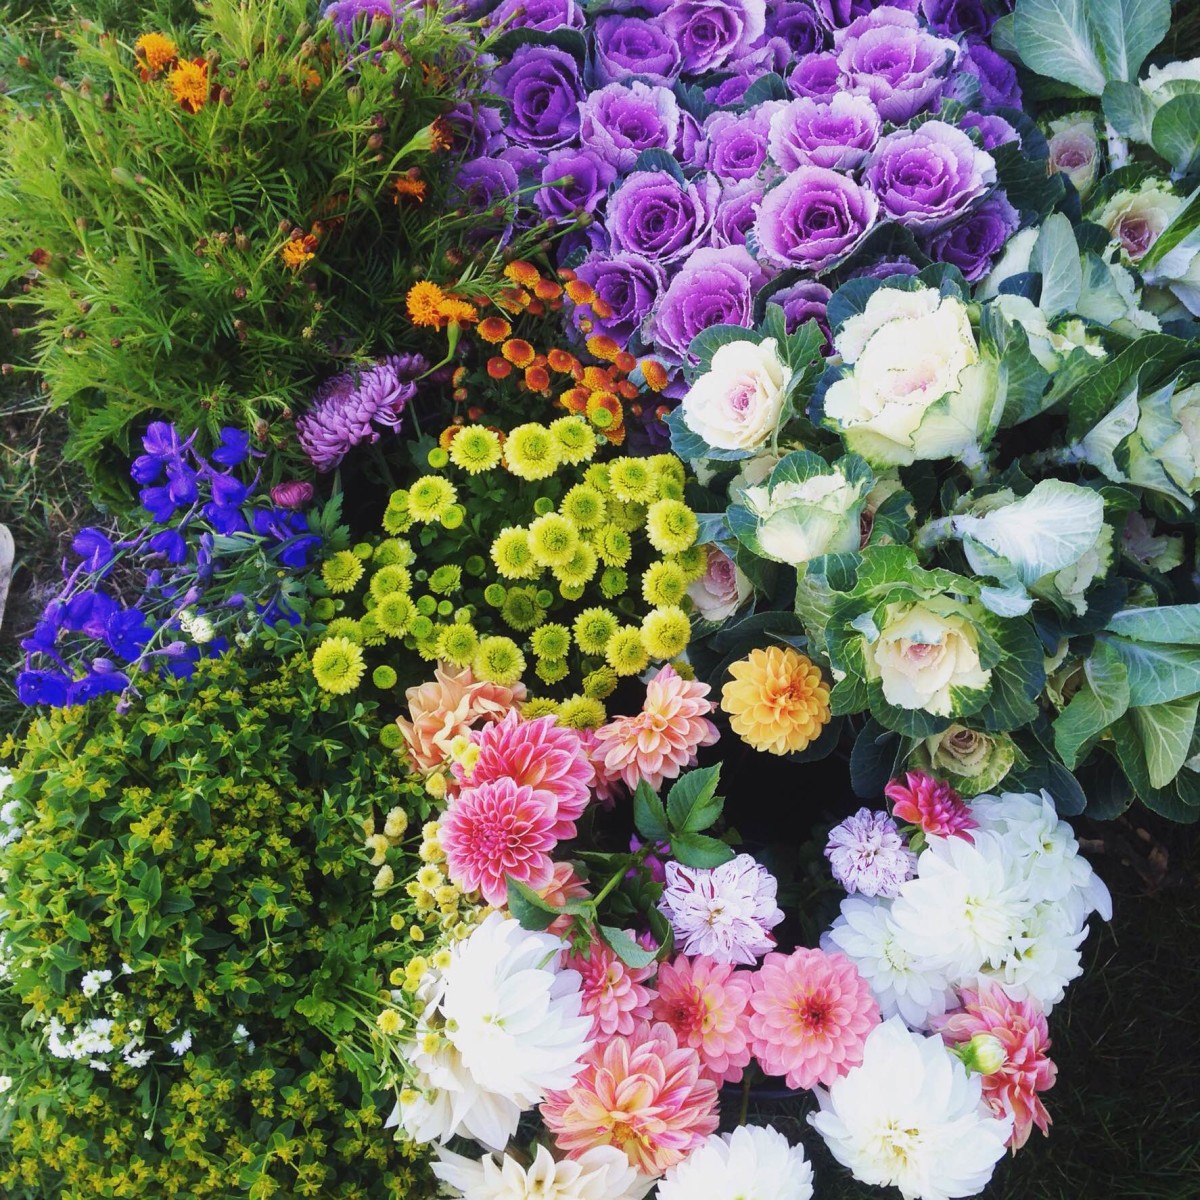 several bunches of flowers in a variety of colors